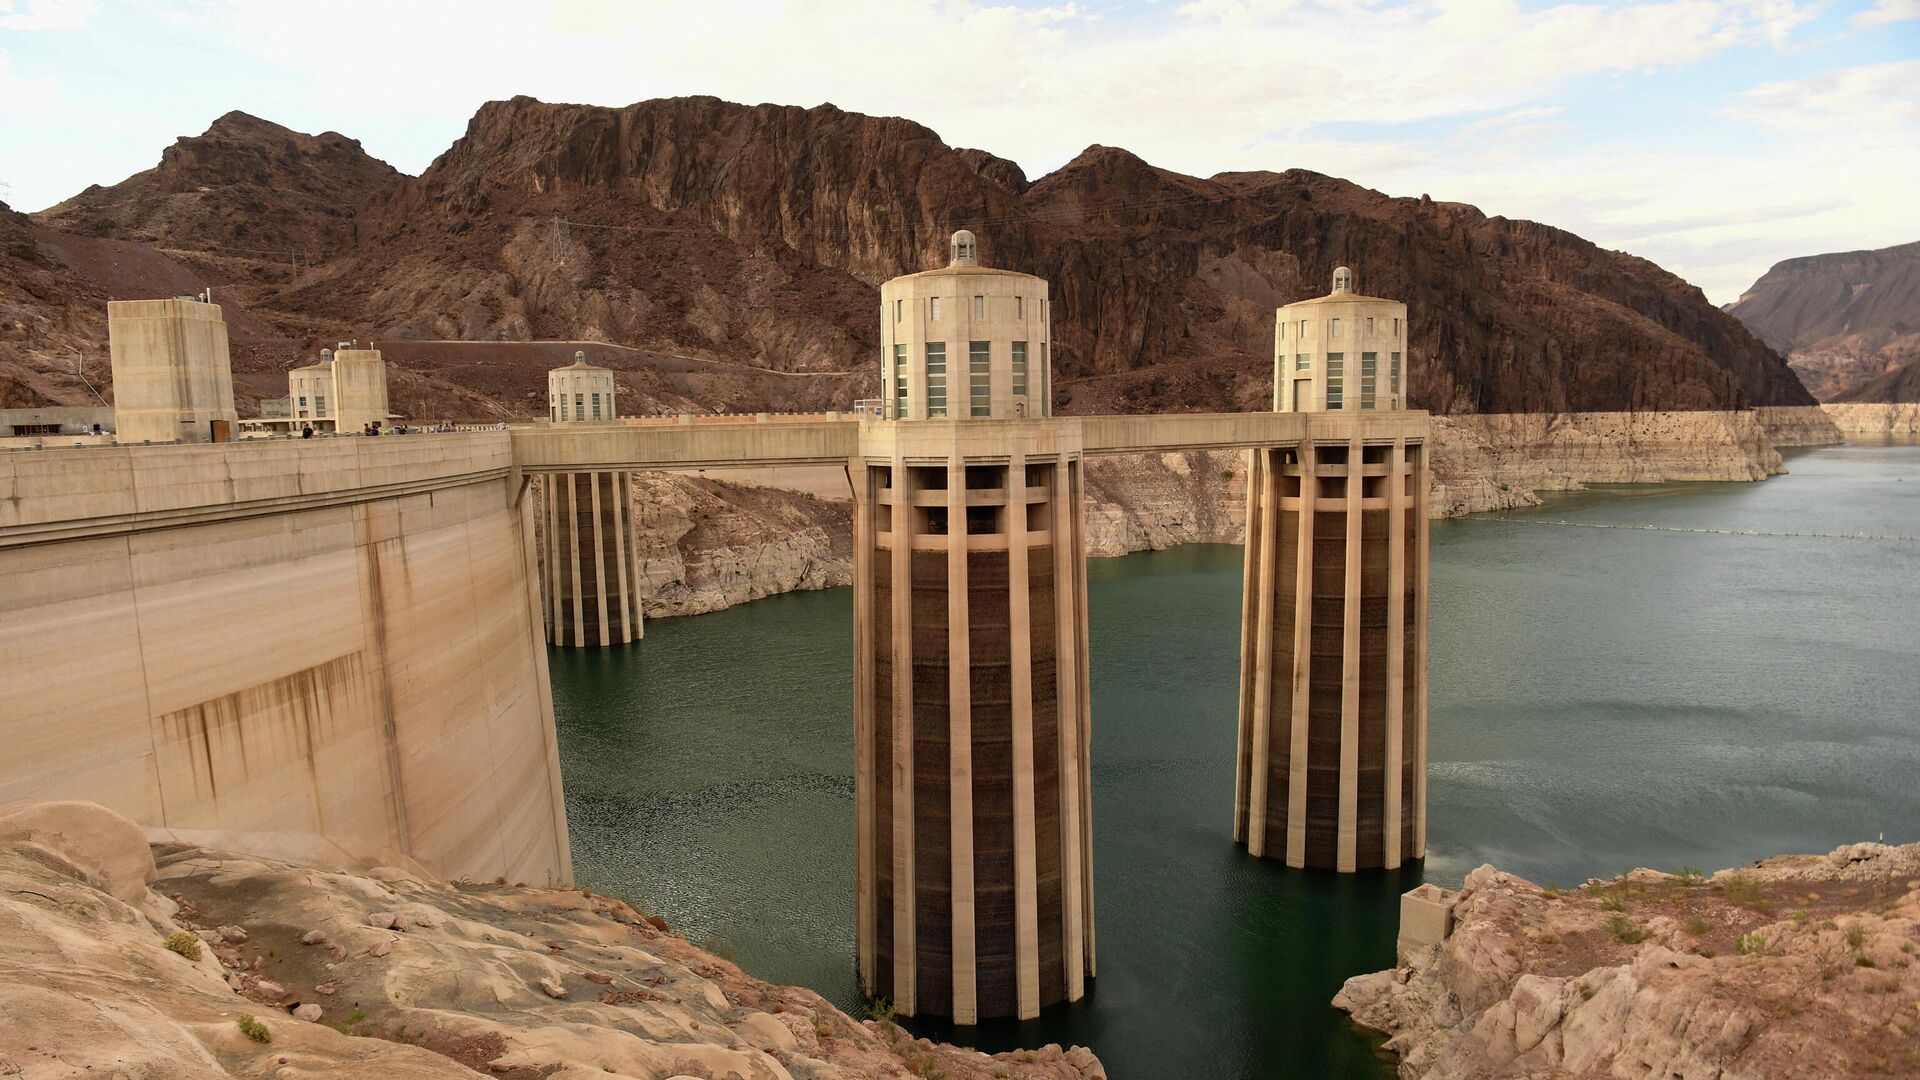 Intake towers for water to enter to generate electricity and provide hydroelectric power stand during low water levels due the western drought on July 19, 2021 at the Hoover Dam on the Colorado River at the Nevada and Arizona state border. - Sputnik International, 1920, 12.05.2022